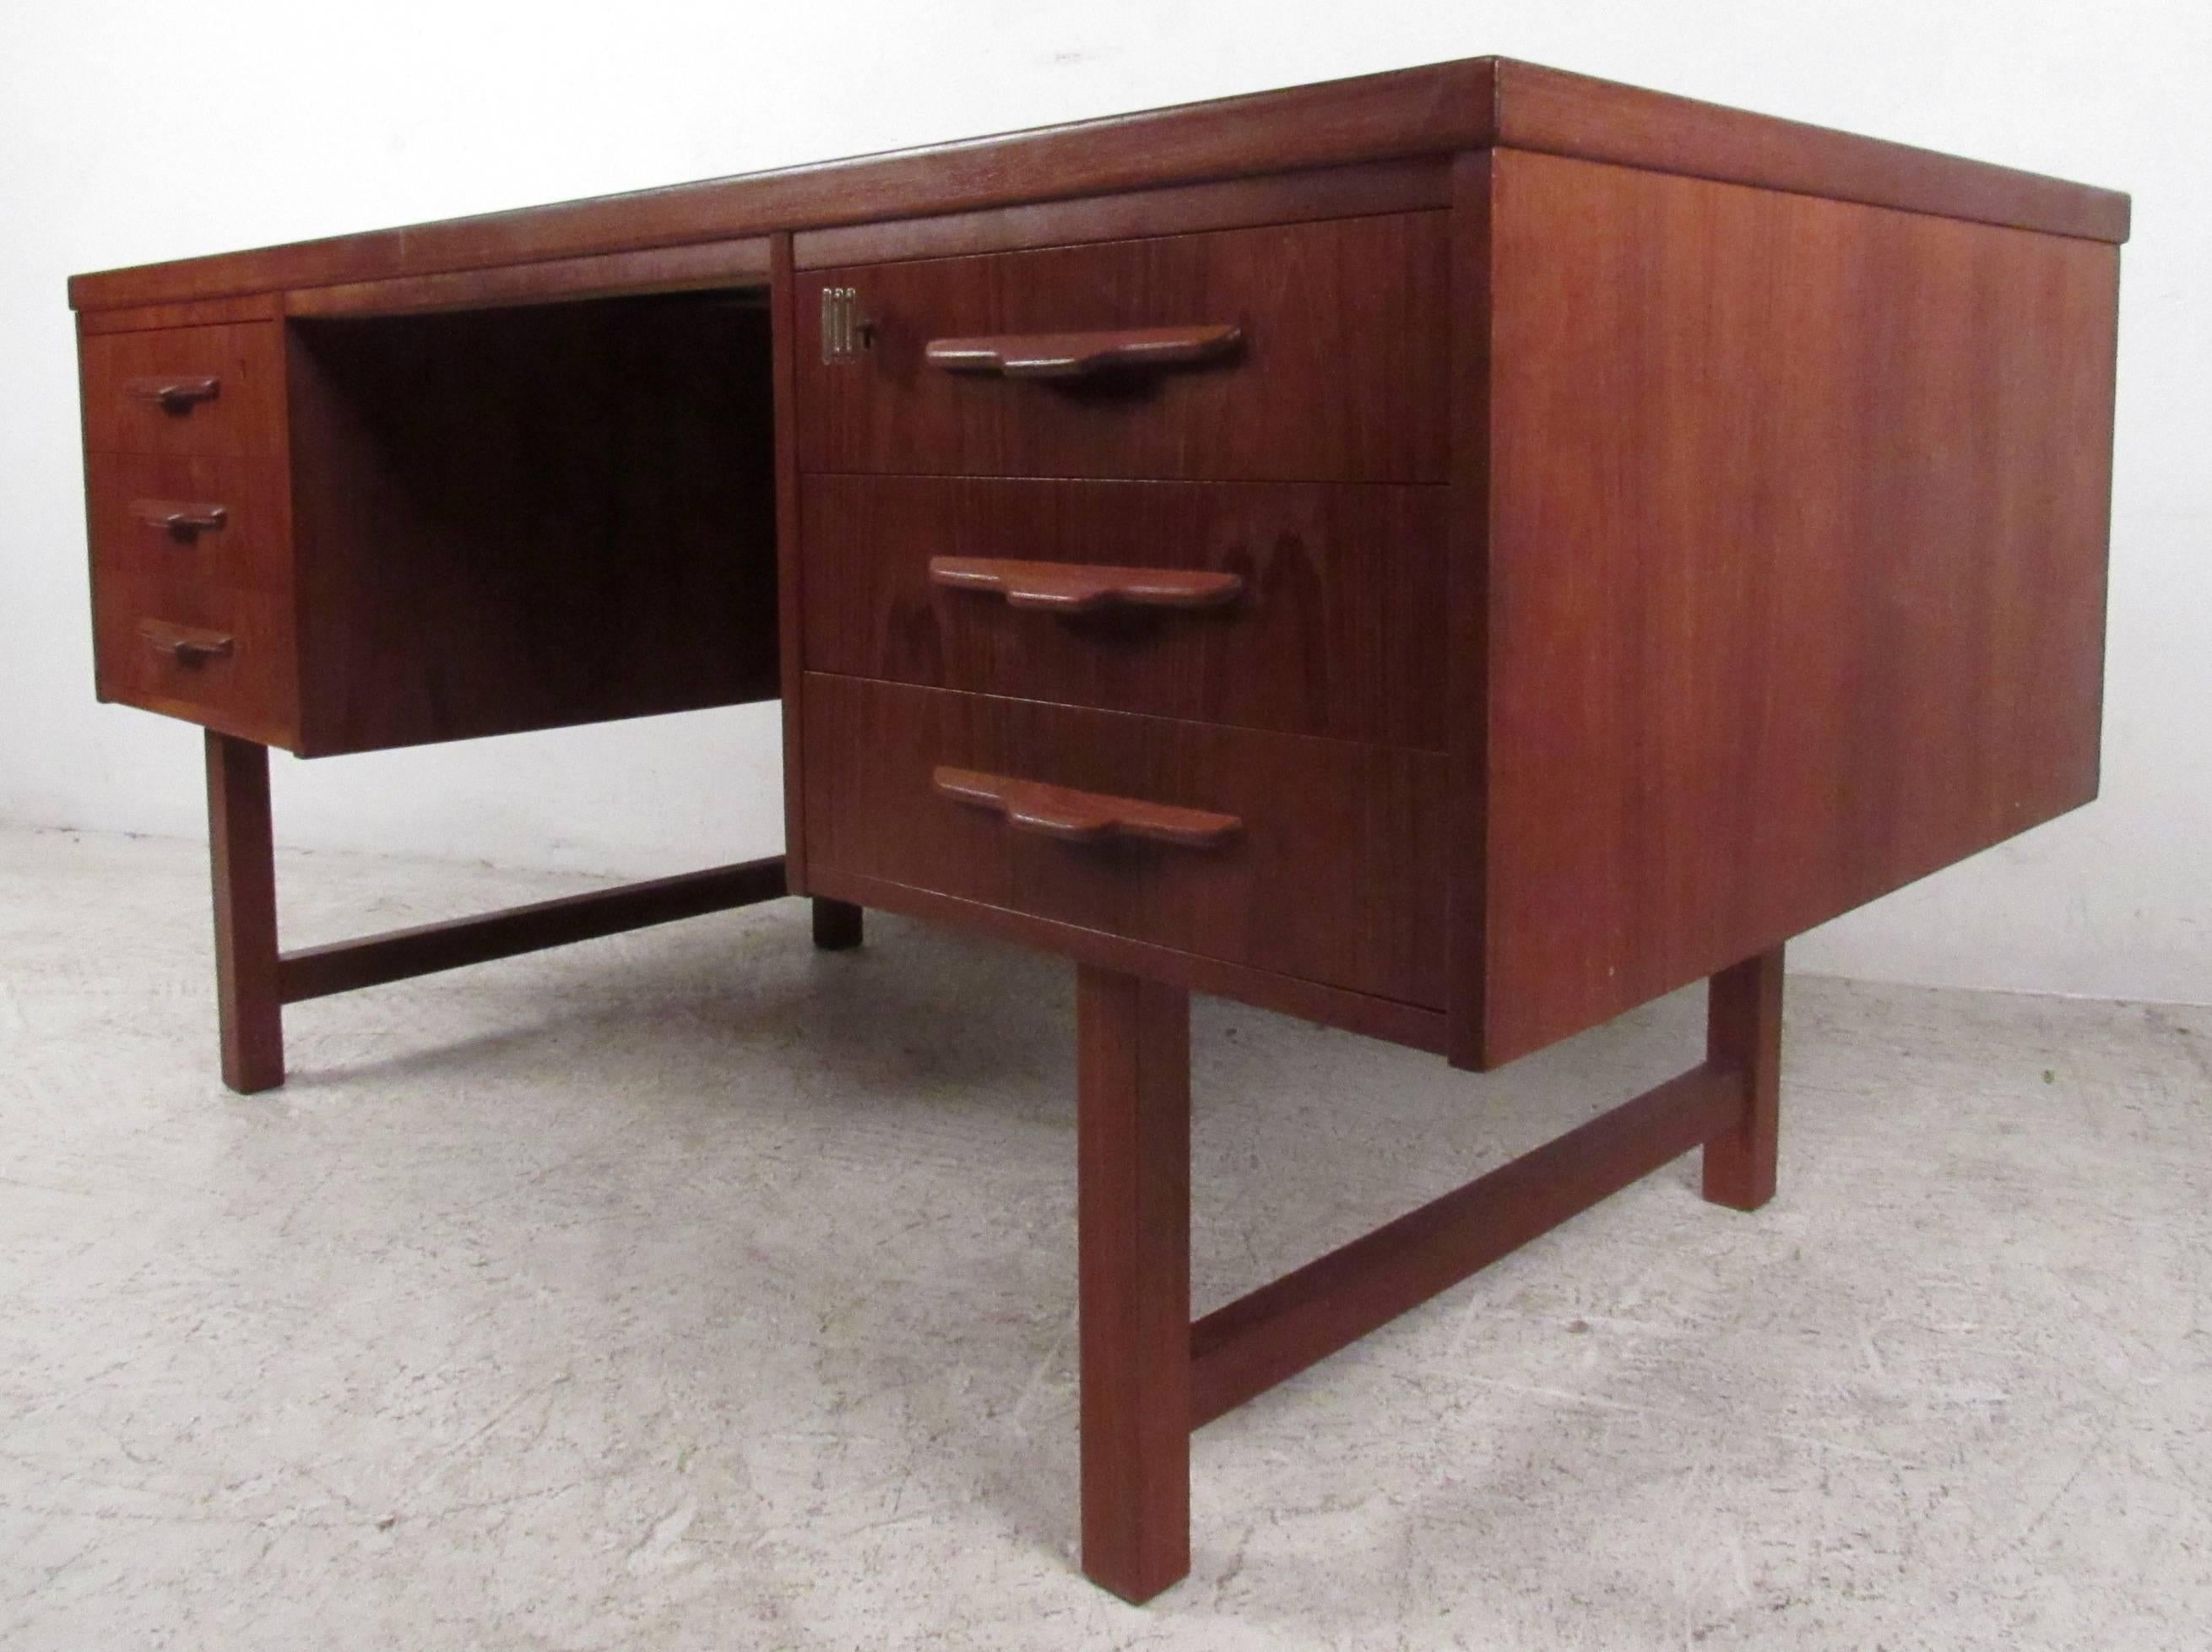 Vintage Danish Modern finished back desk featuring sculpted handles and rich teak wood grain throughout.

Please confirm item location NY or NJ with dealer.